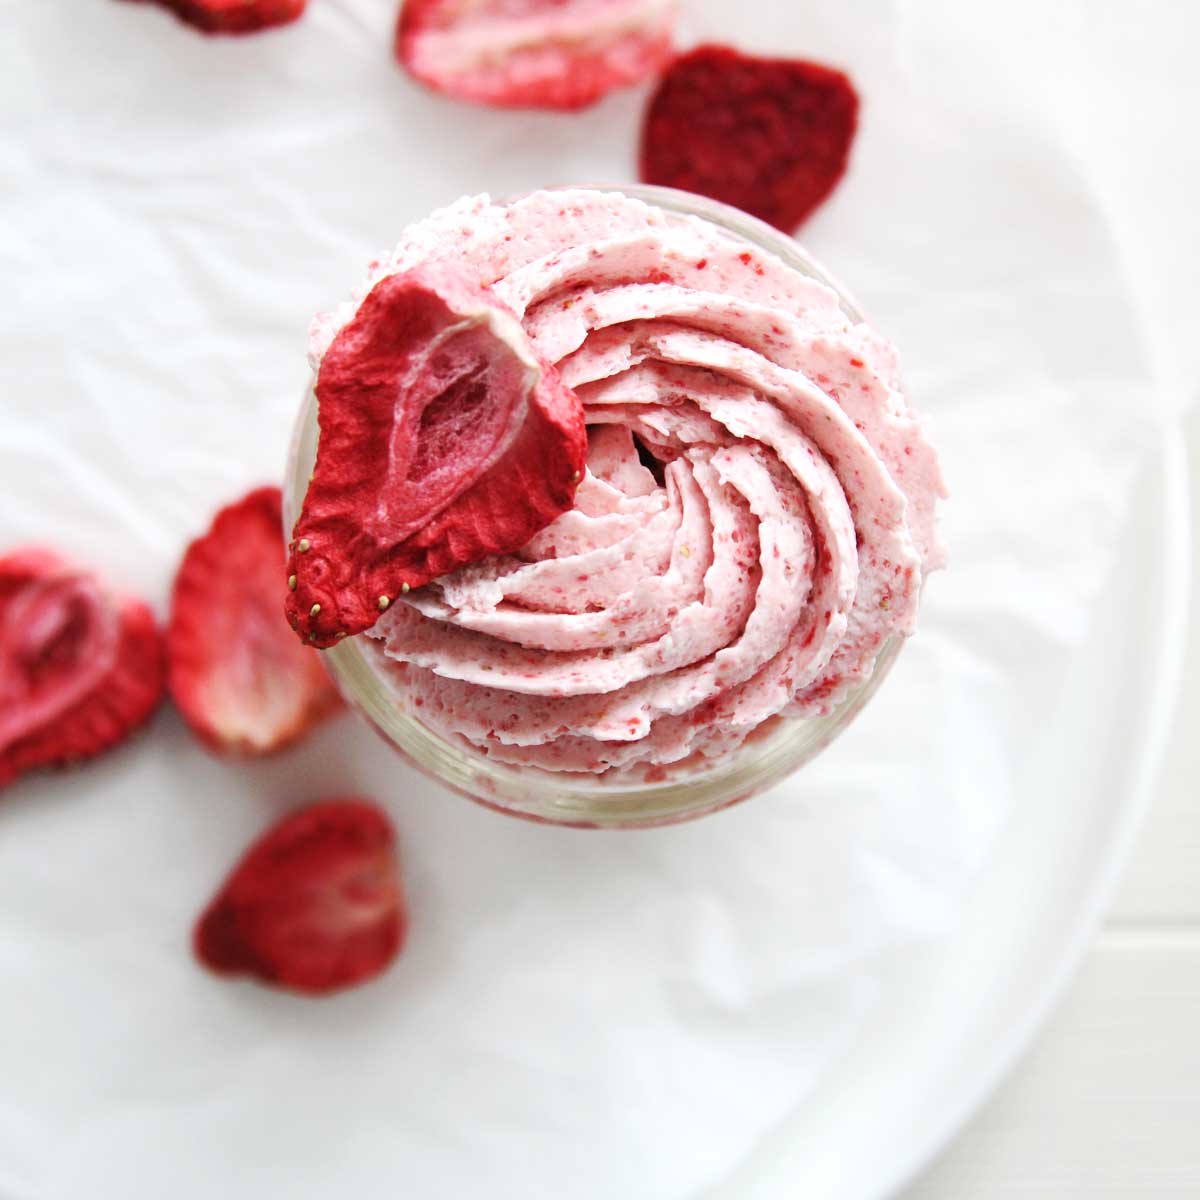 So Simple! Strawberry Whipped Cream (Chantilly Cream) Recipe - Strawberry Japanese Roll Cake